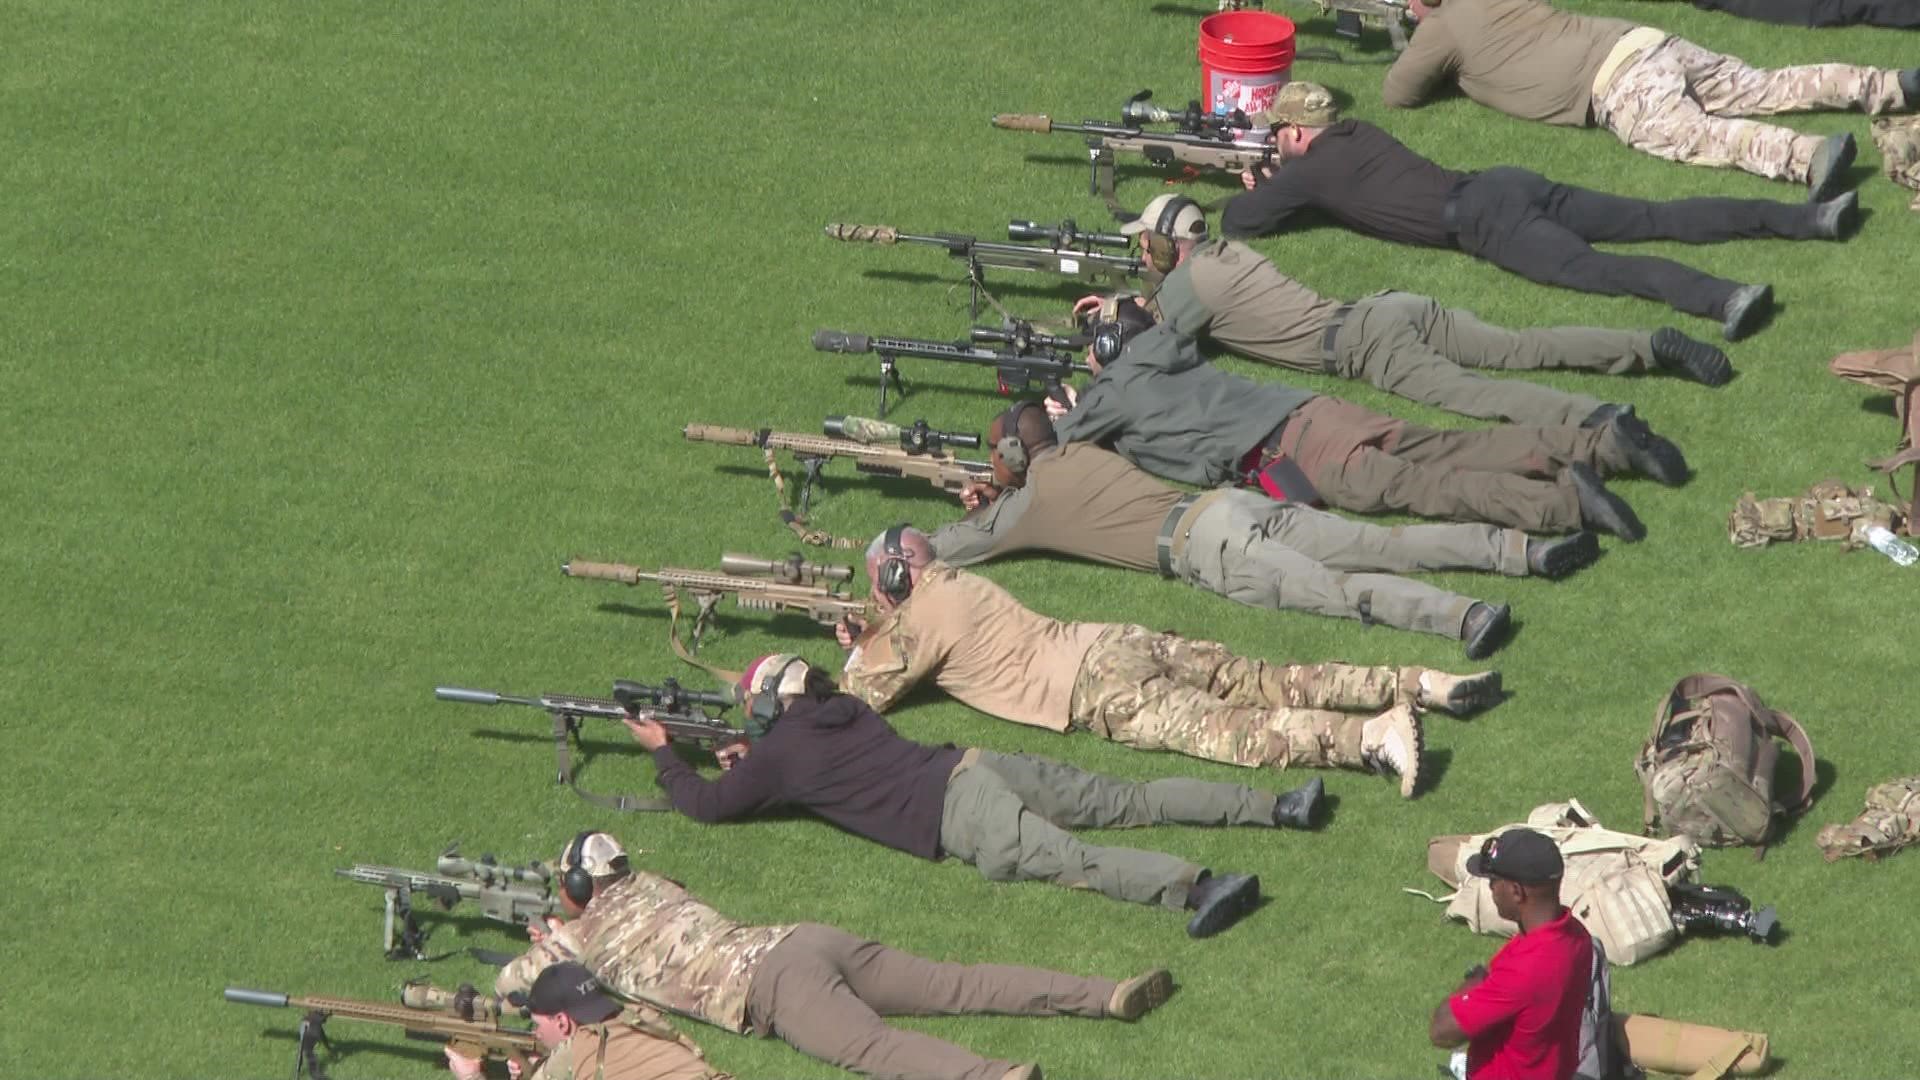 Police snipers from across the country are practicing their shooting as part of their crisis-response training. 9NEWS reporter Courtney Yuen shows us.